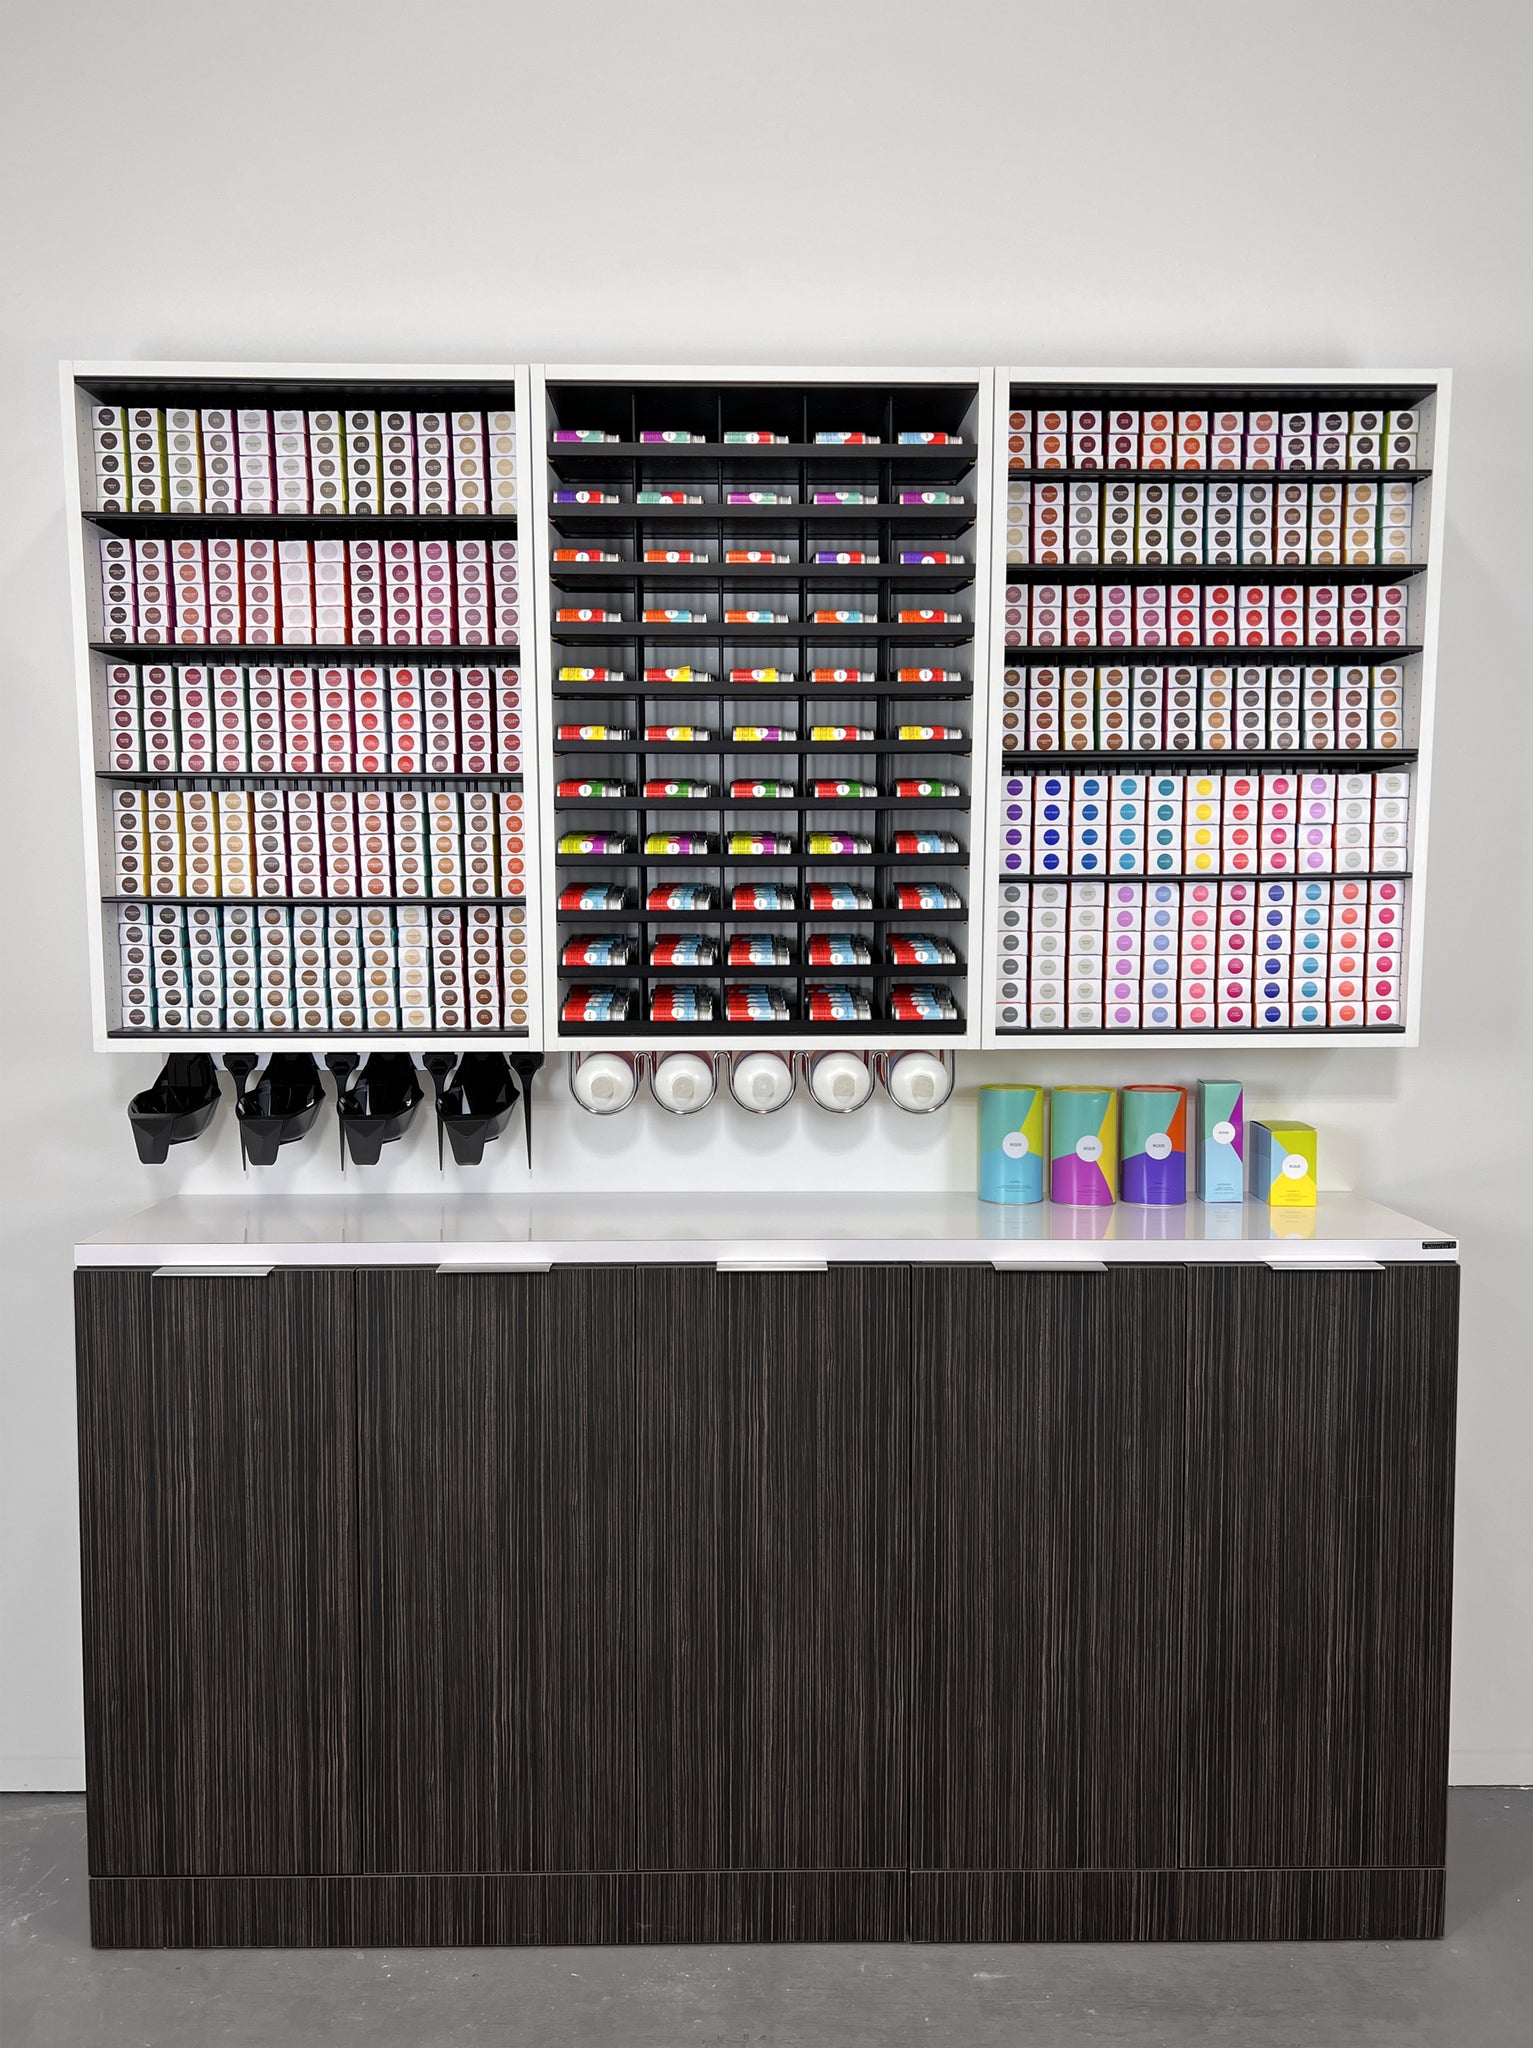 Dyerector White ModCab Hair color organizers in a hair salon over a Collins lower cabinet with R+Co haircolor